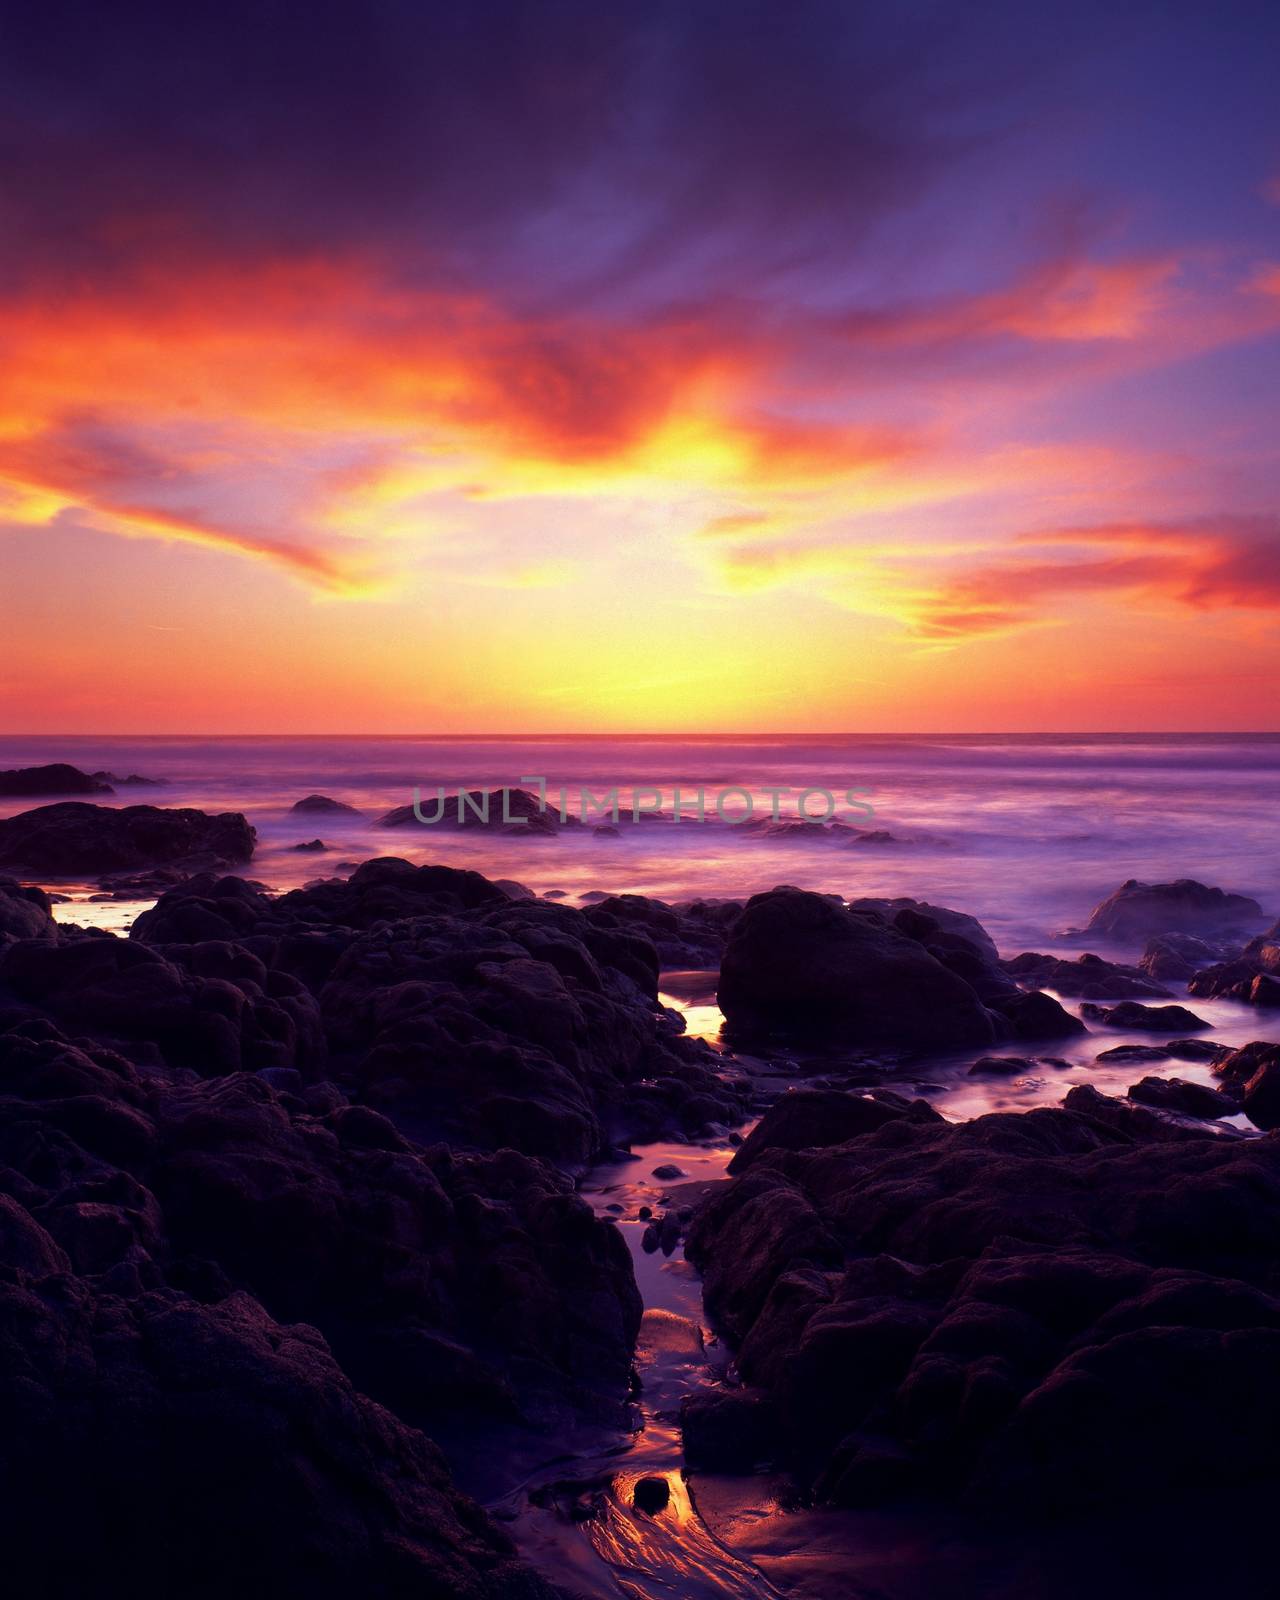 McClure's Beach Sunset by adonis_abril